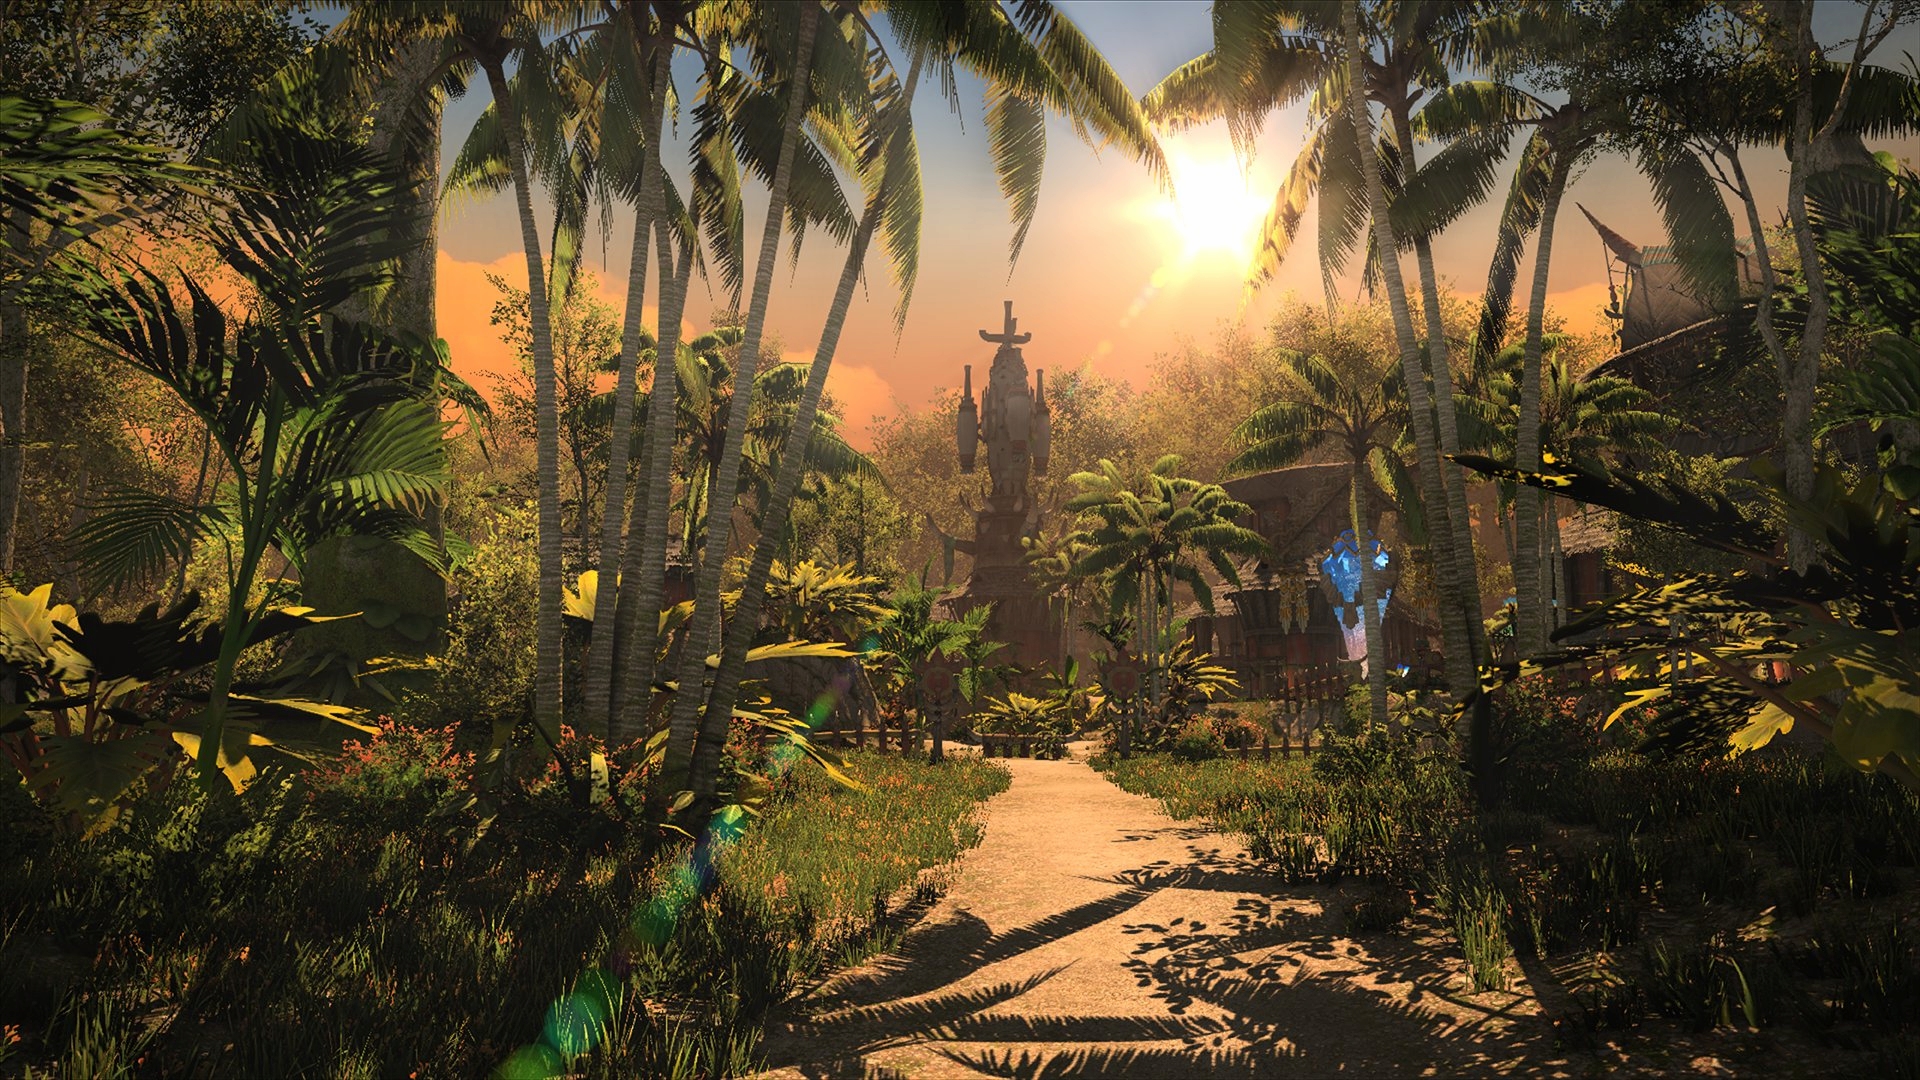 A new jungle forest area from FFXIV with shining sunlight, palm trees, and a sandy path